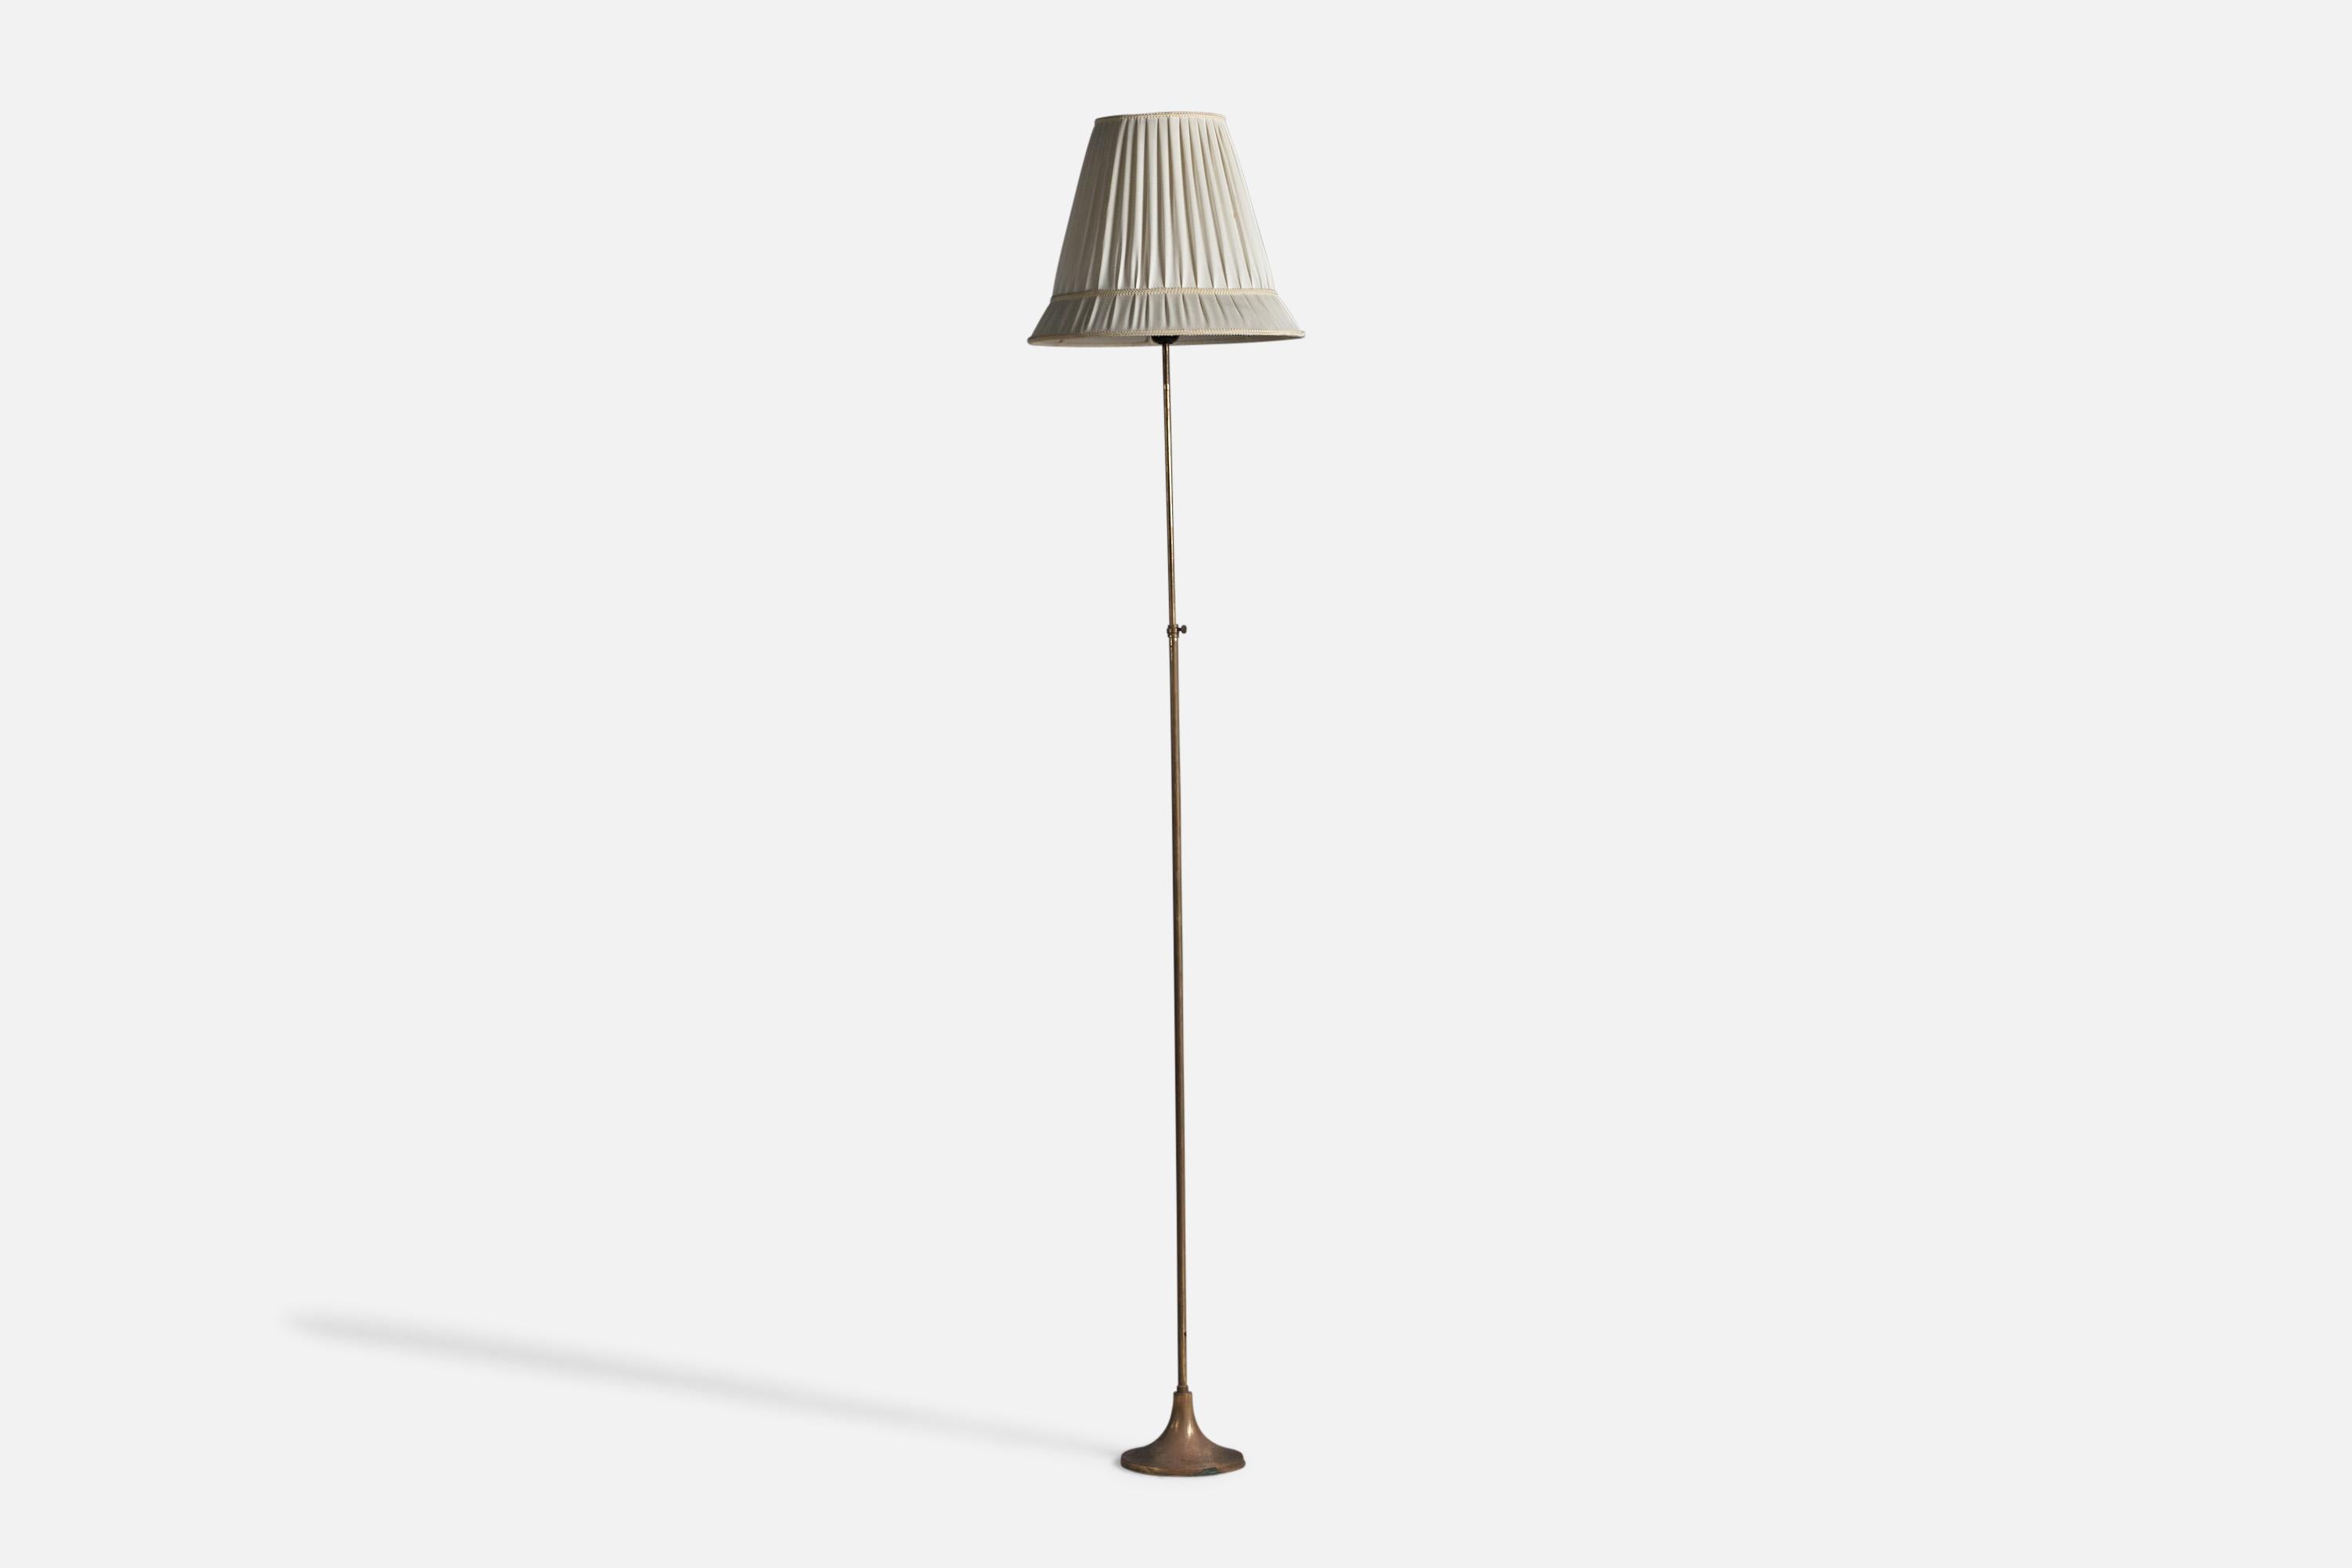 An adjustable brass and fabric floor lamp, designed and produced in Sweden, 1930s.

Overall Dimensions (inches): 69.5